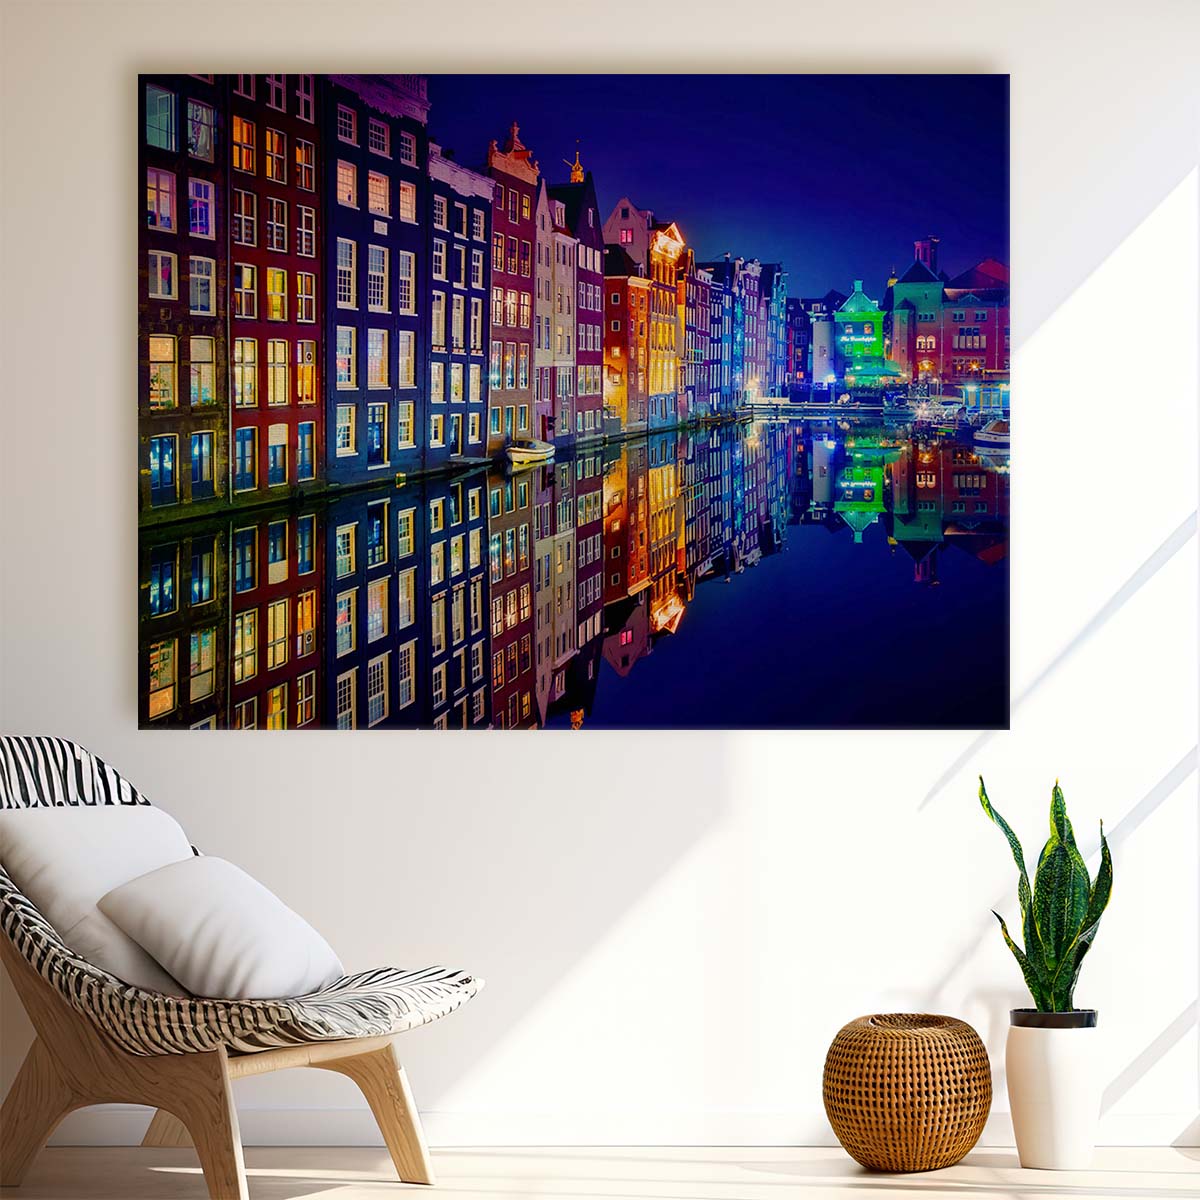 Amsterdam Canal Nightscape Colorful Urban Reflection Wall Art by Luxuriance Designs. Made in USA.